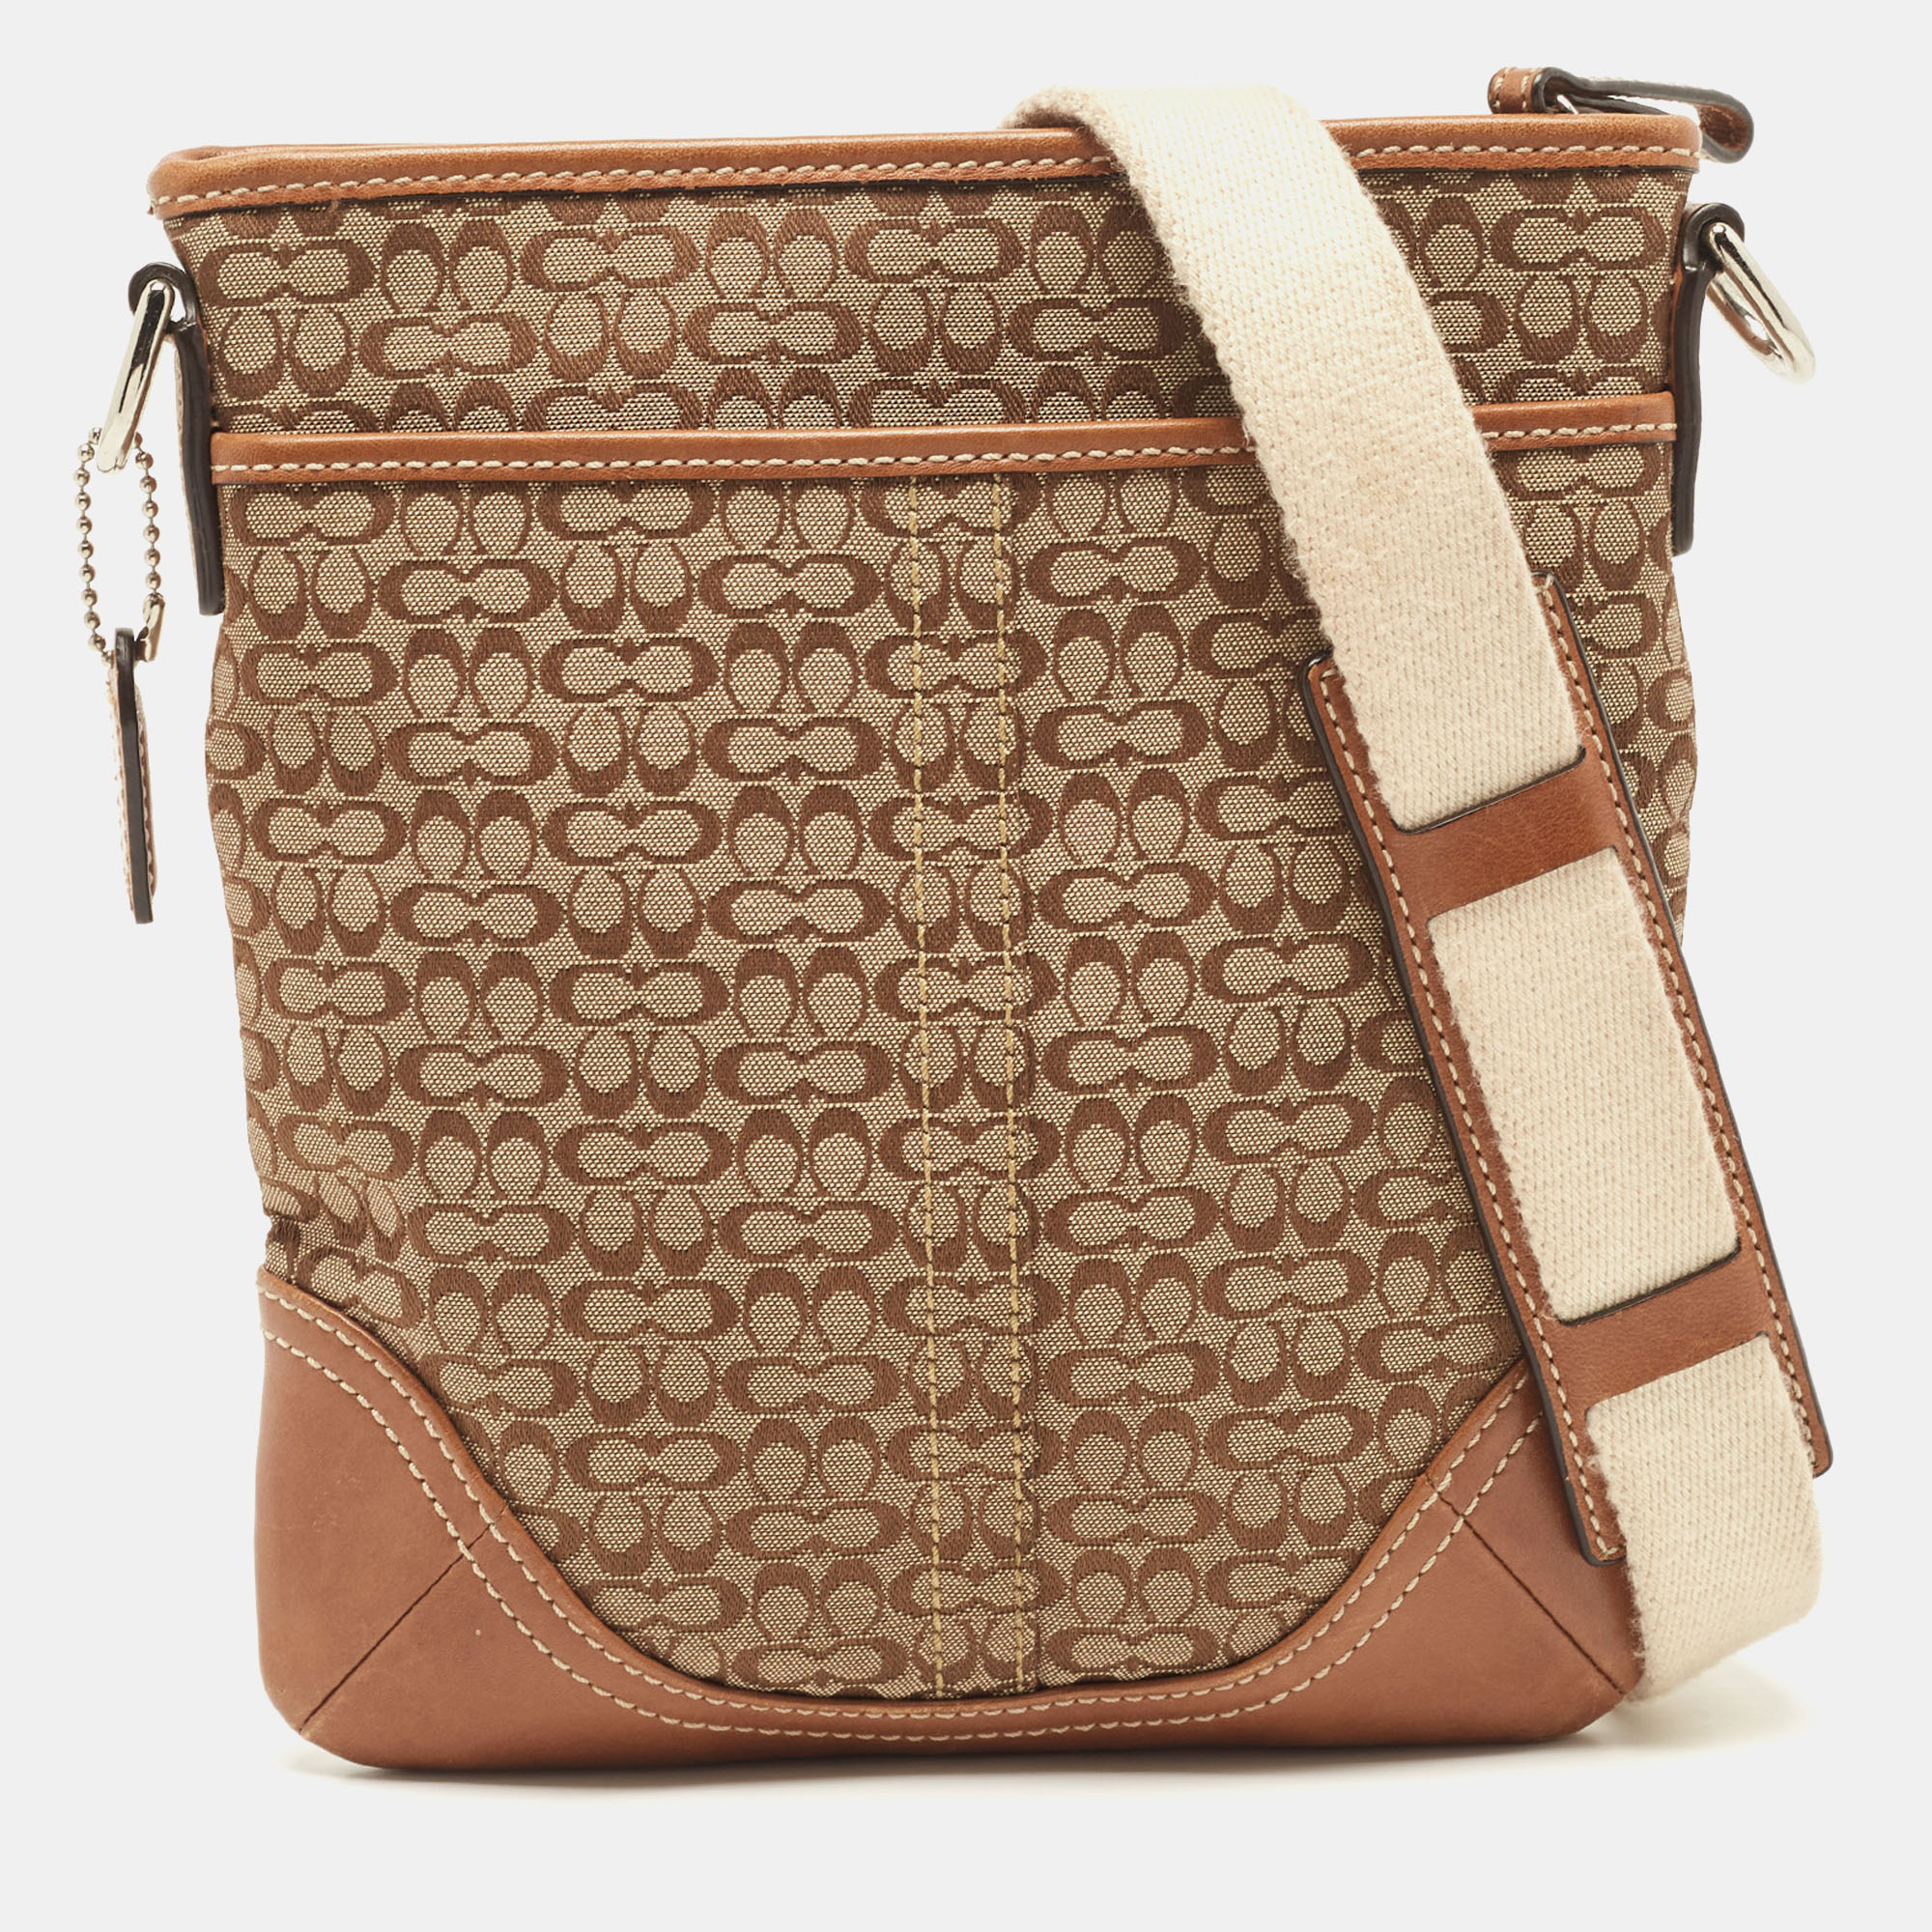 Coach Brown/Beige Signature Canvas And Leather Swingpack Crossbody Bag